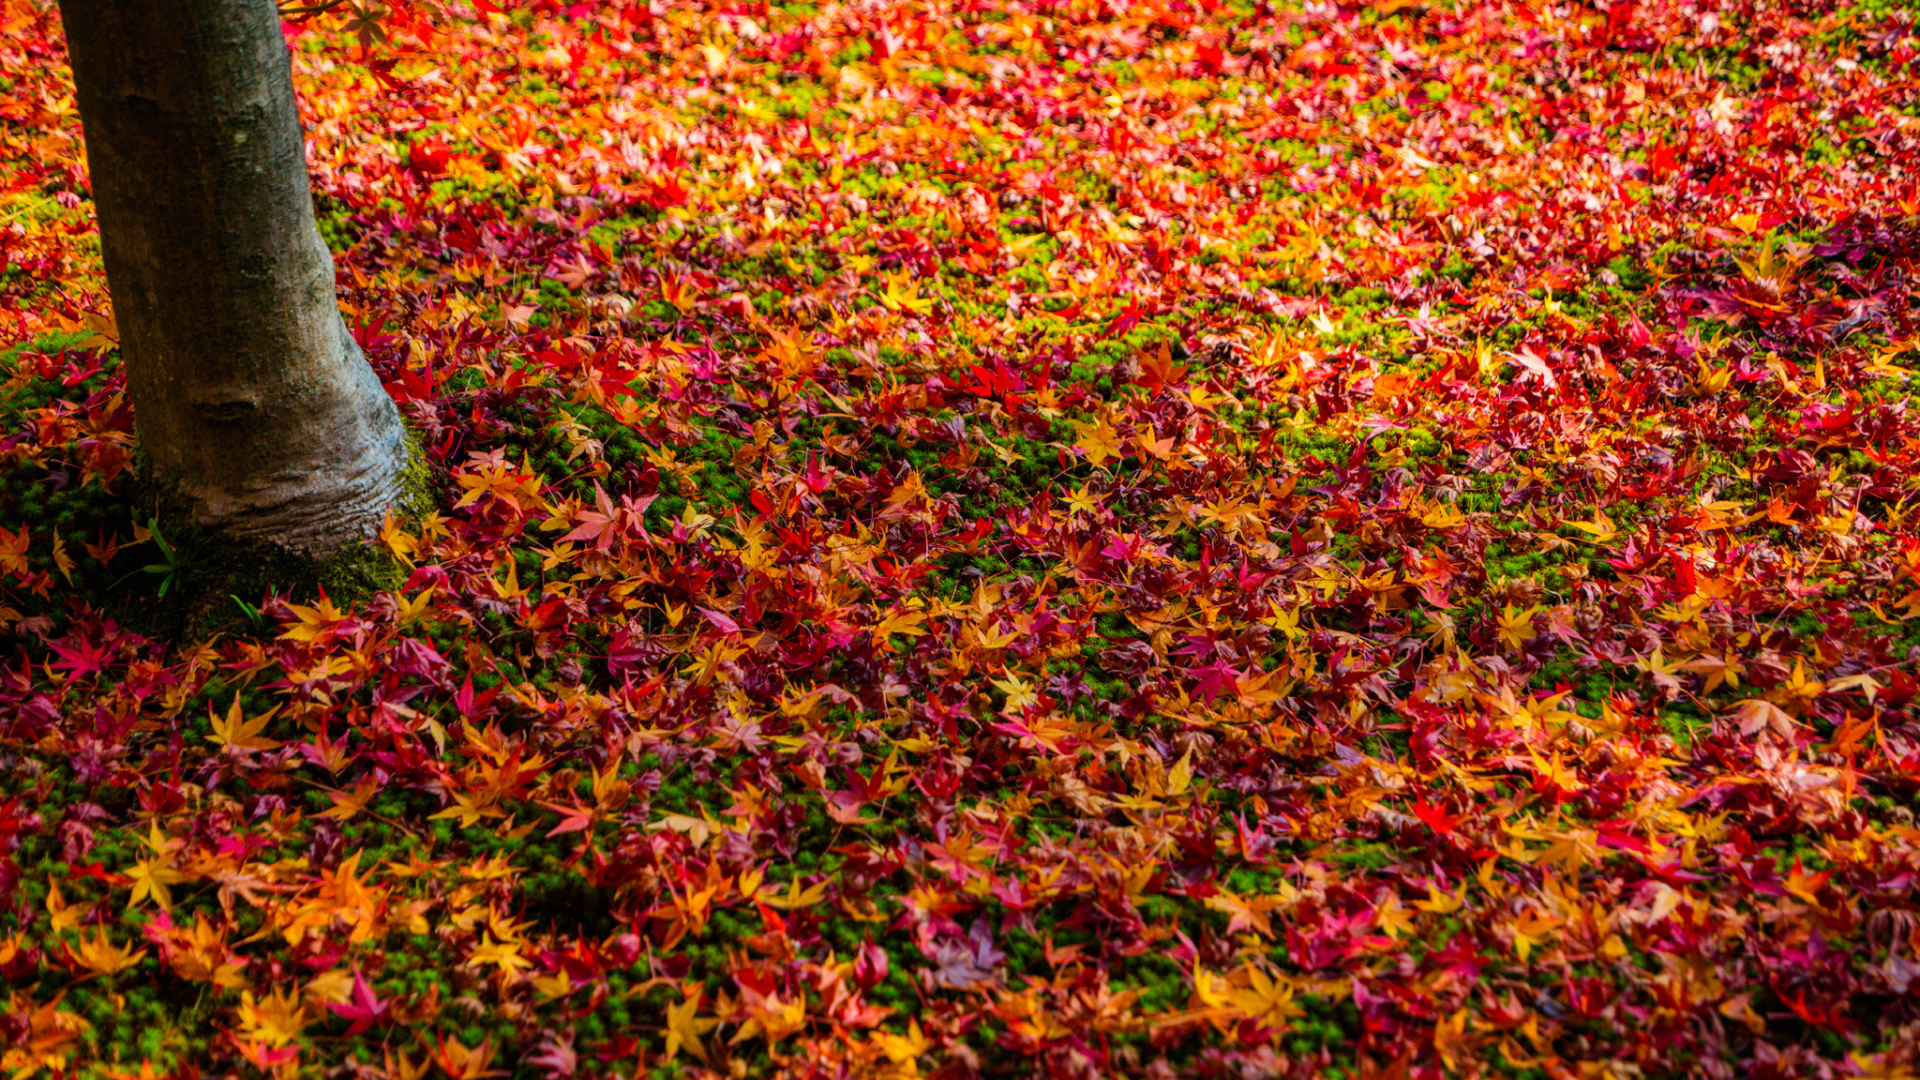 Multicolored fallen leaves in the autumn forest